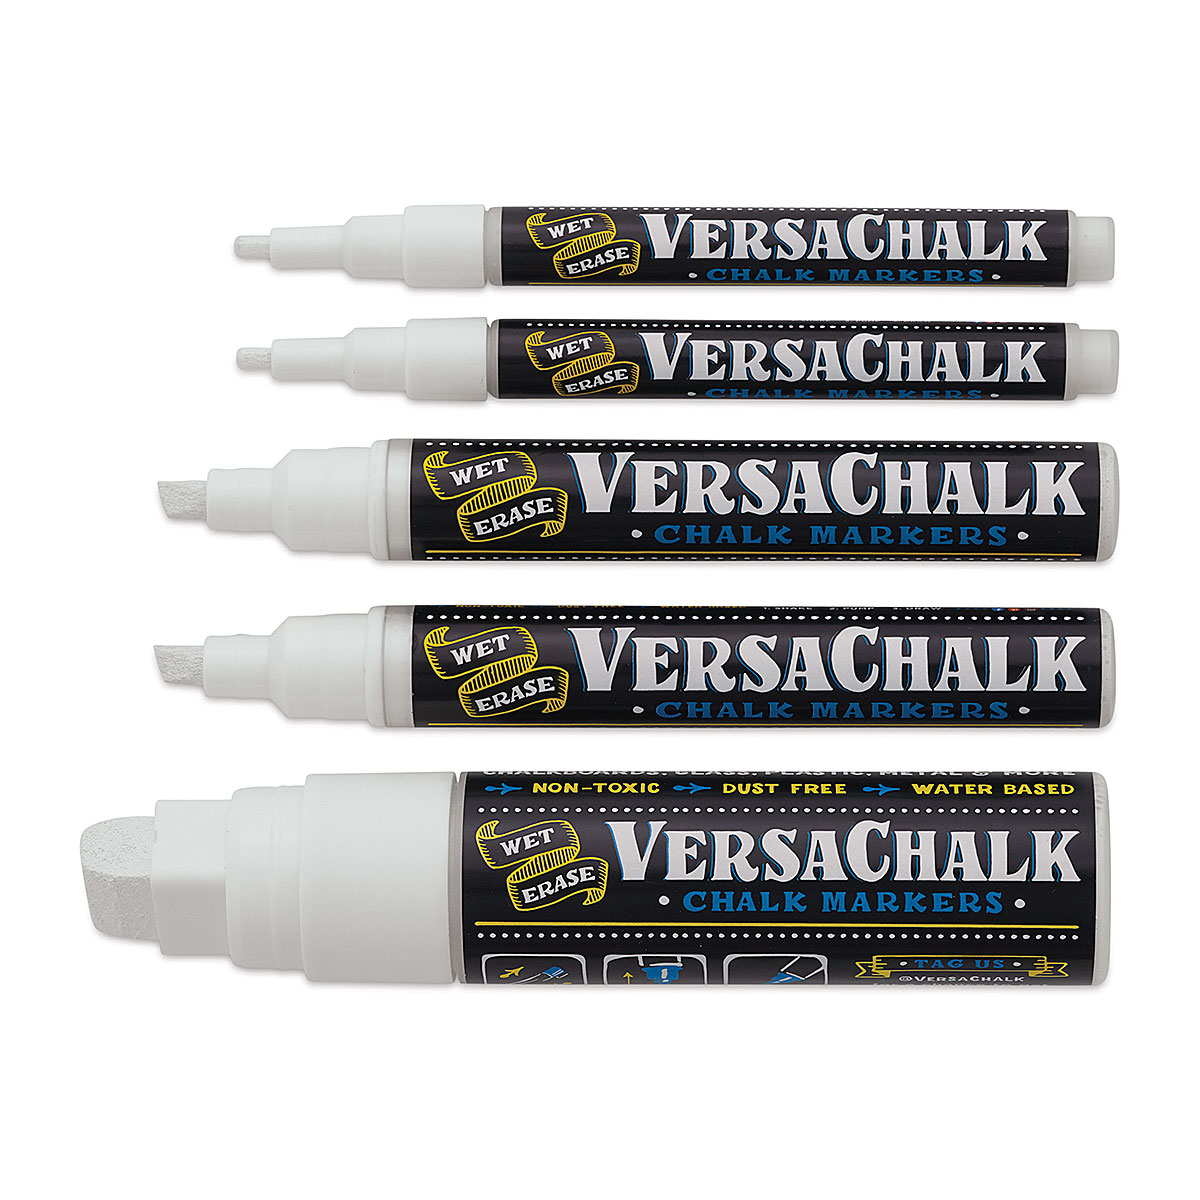 Mr. Pen- White Chalk Markers, 4 Pack, Chalk Markers, White Dry